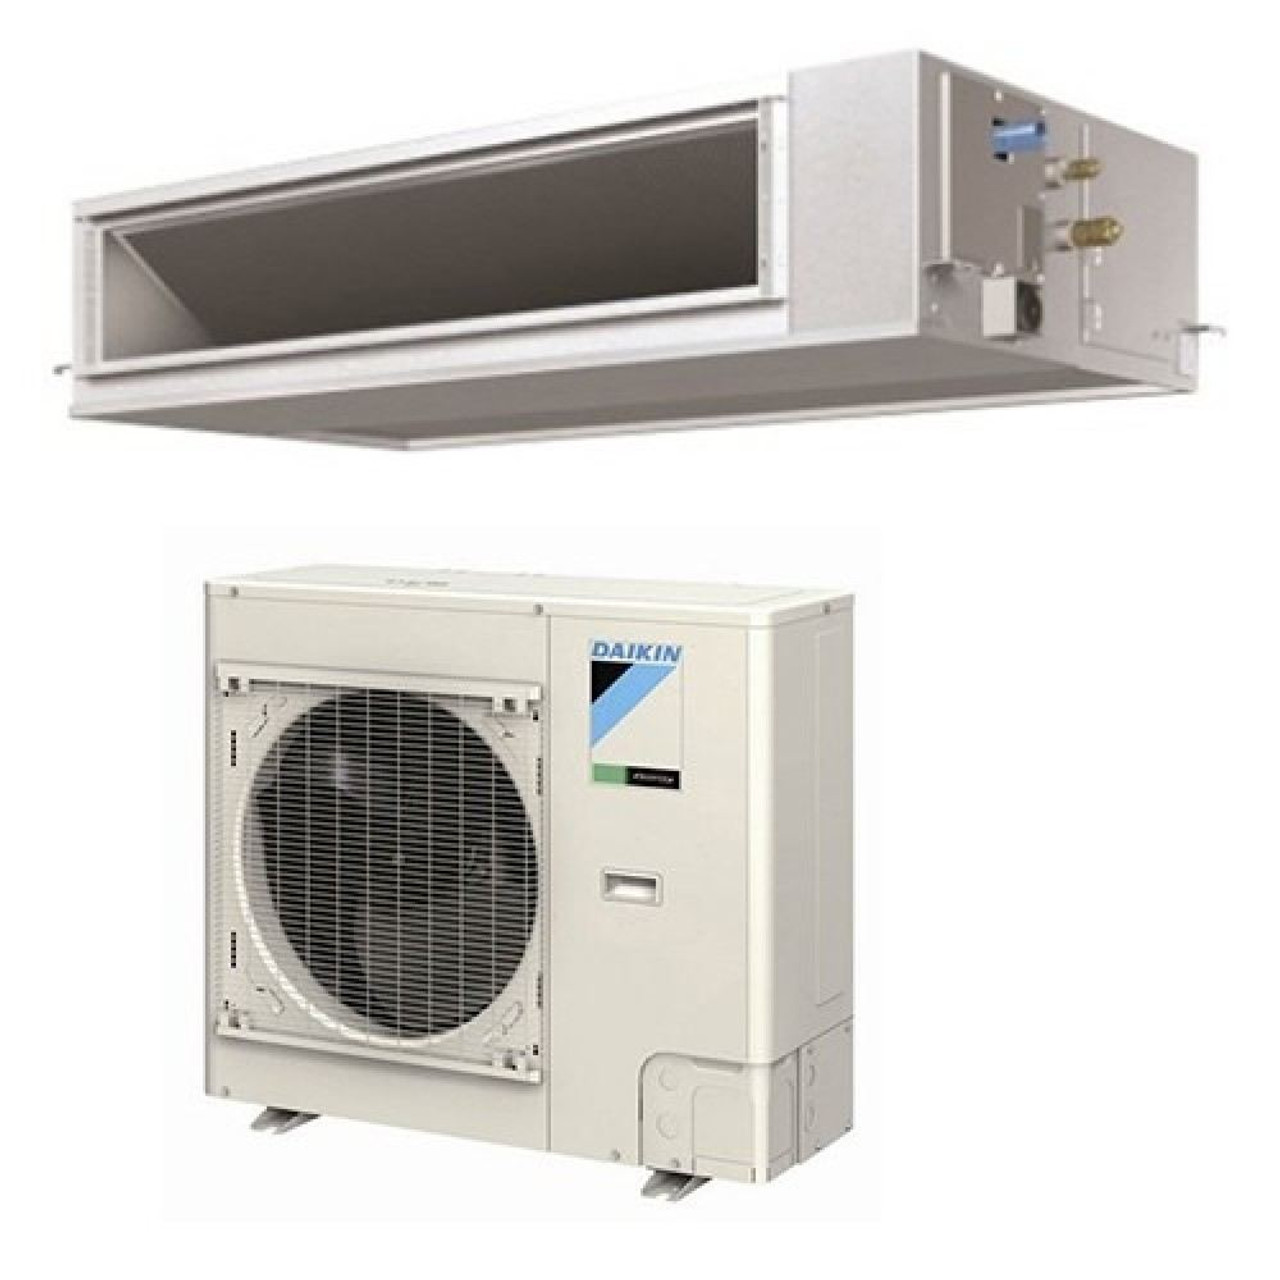 Air conditioner available online